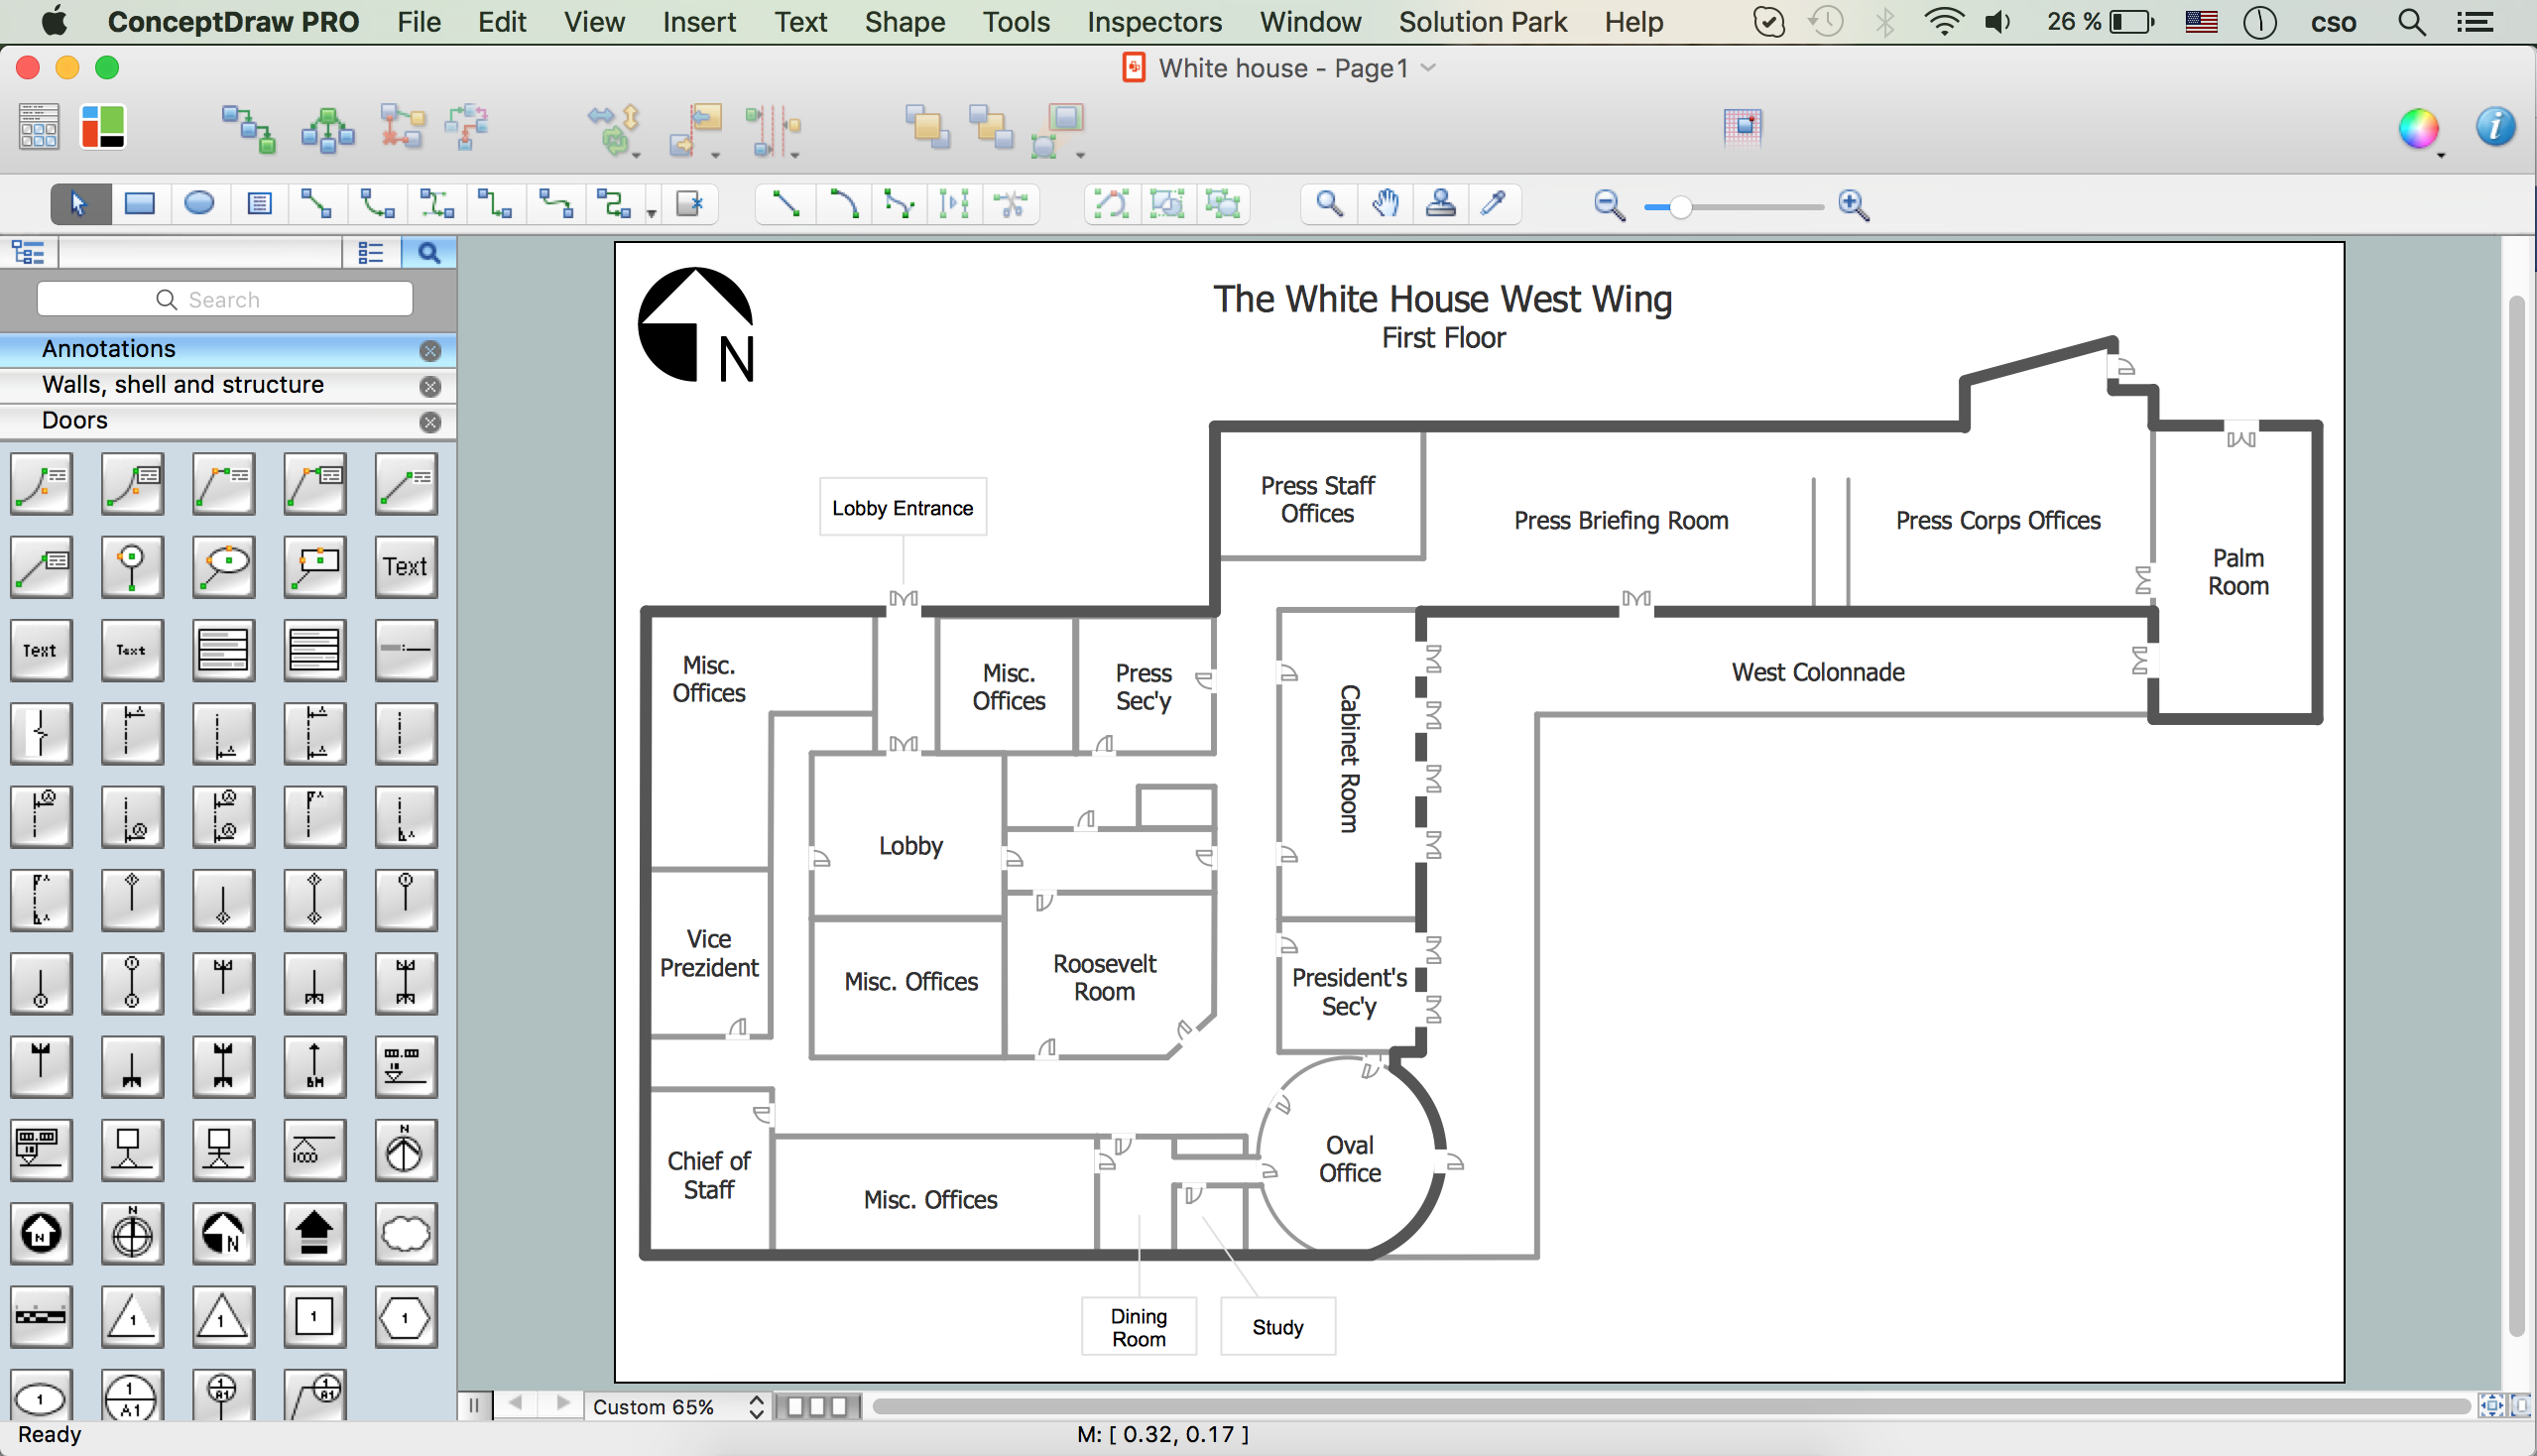 White House Design in ConceptDraw DIAGRAM for Mac